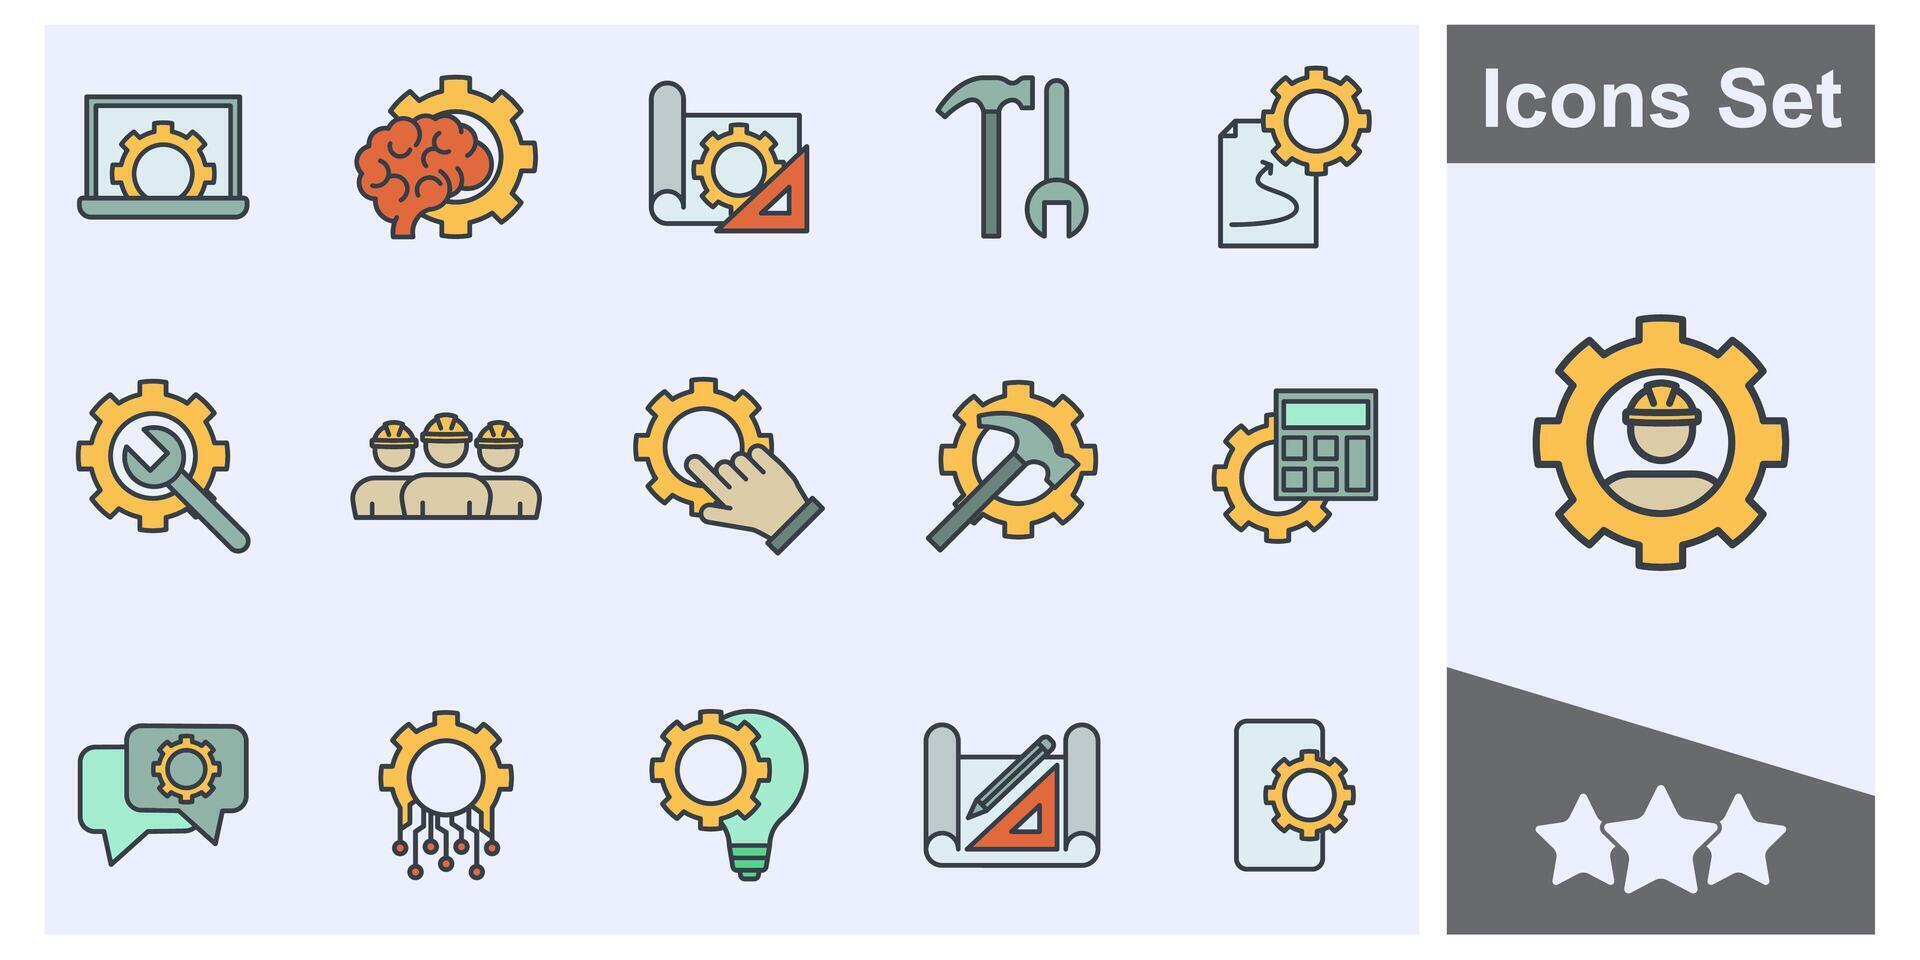 engineering icon set symbol collection, logo isolated illustration vector